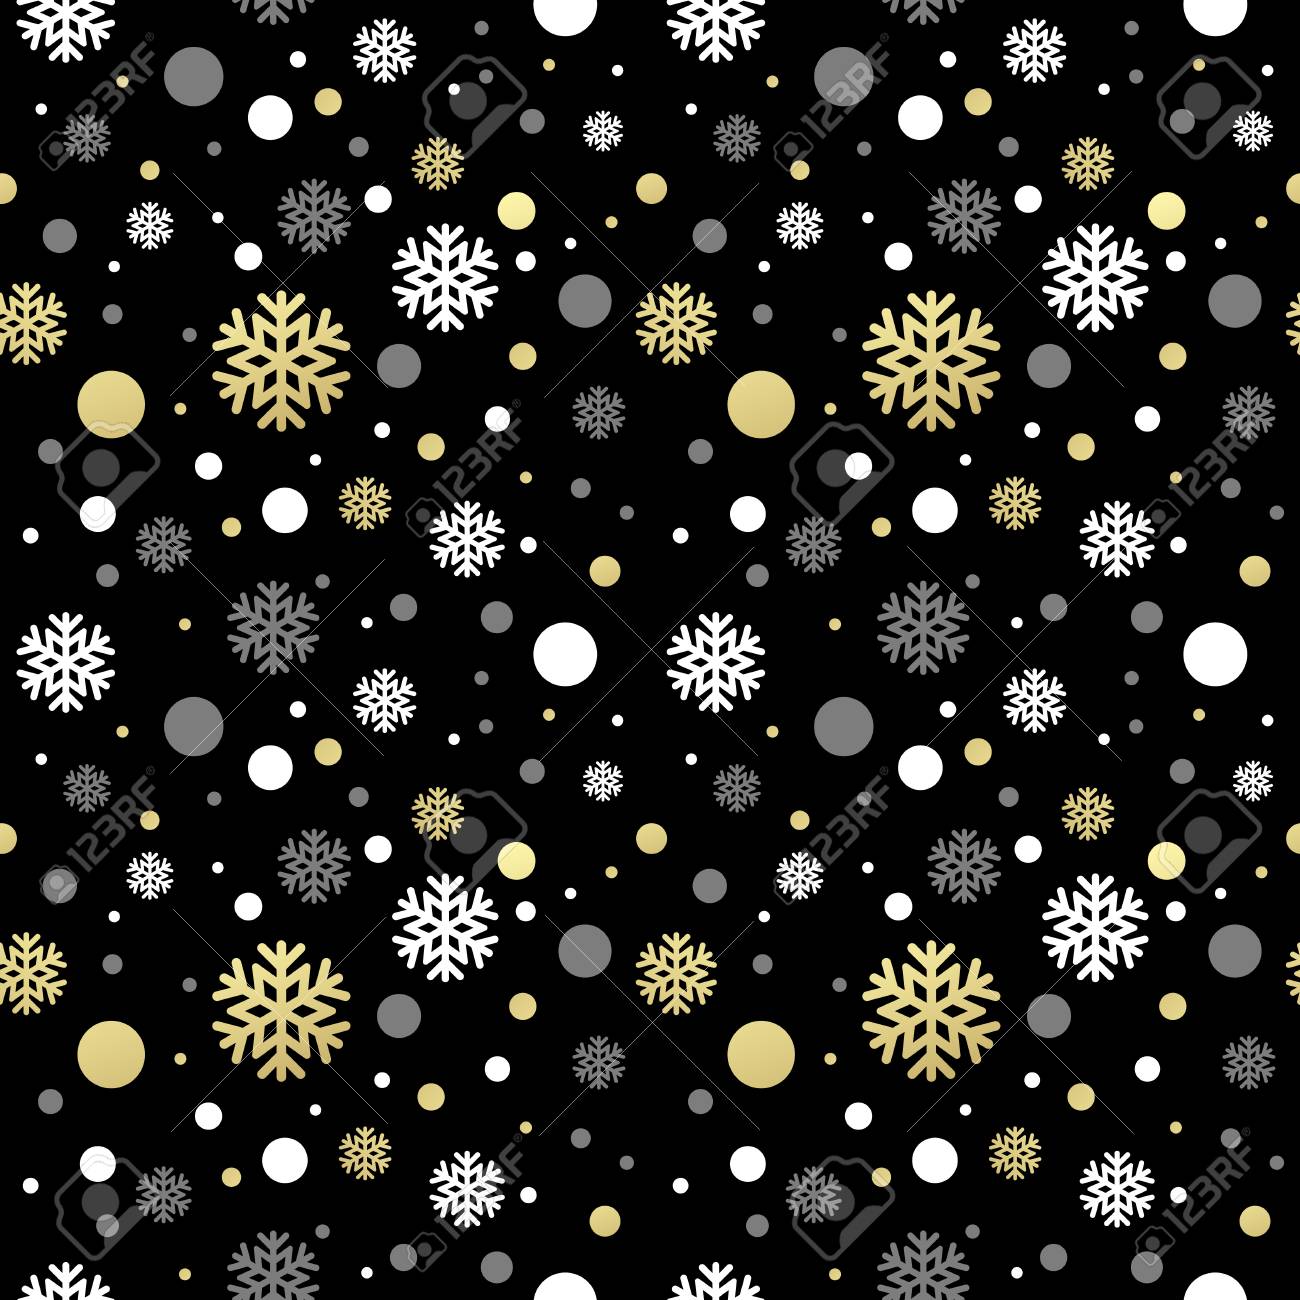 Seamless Black Christmas Wallpaper With White And Golden